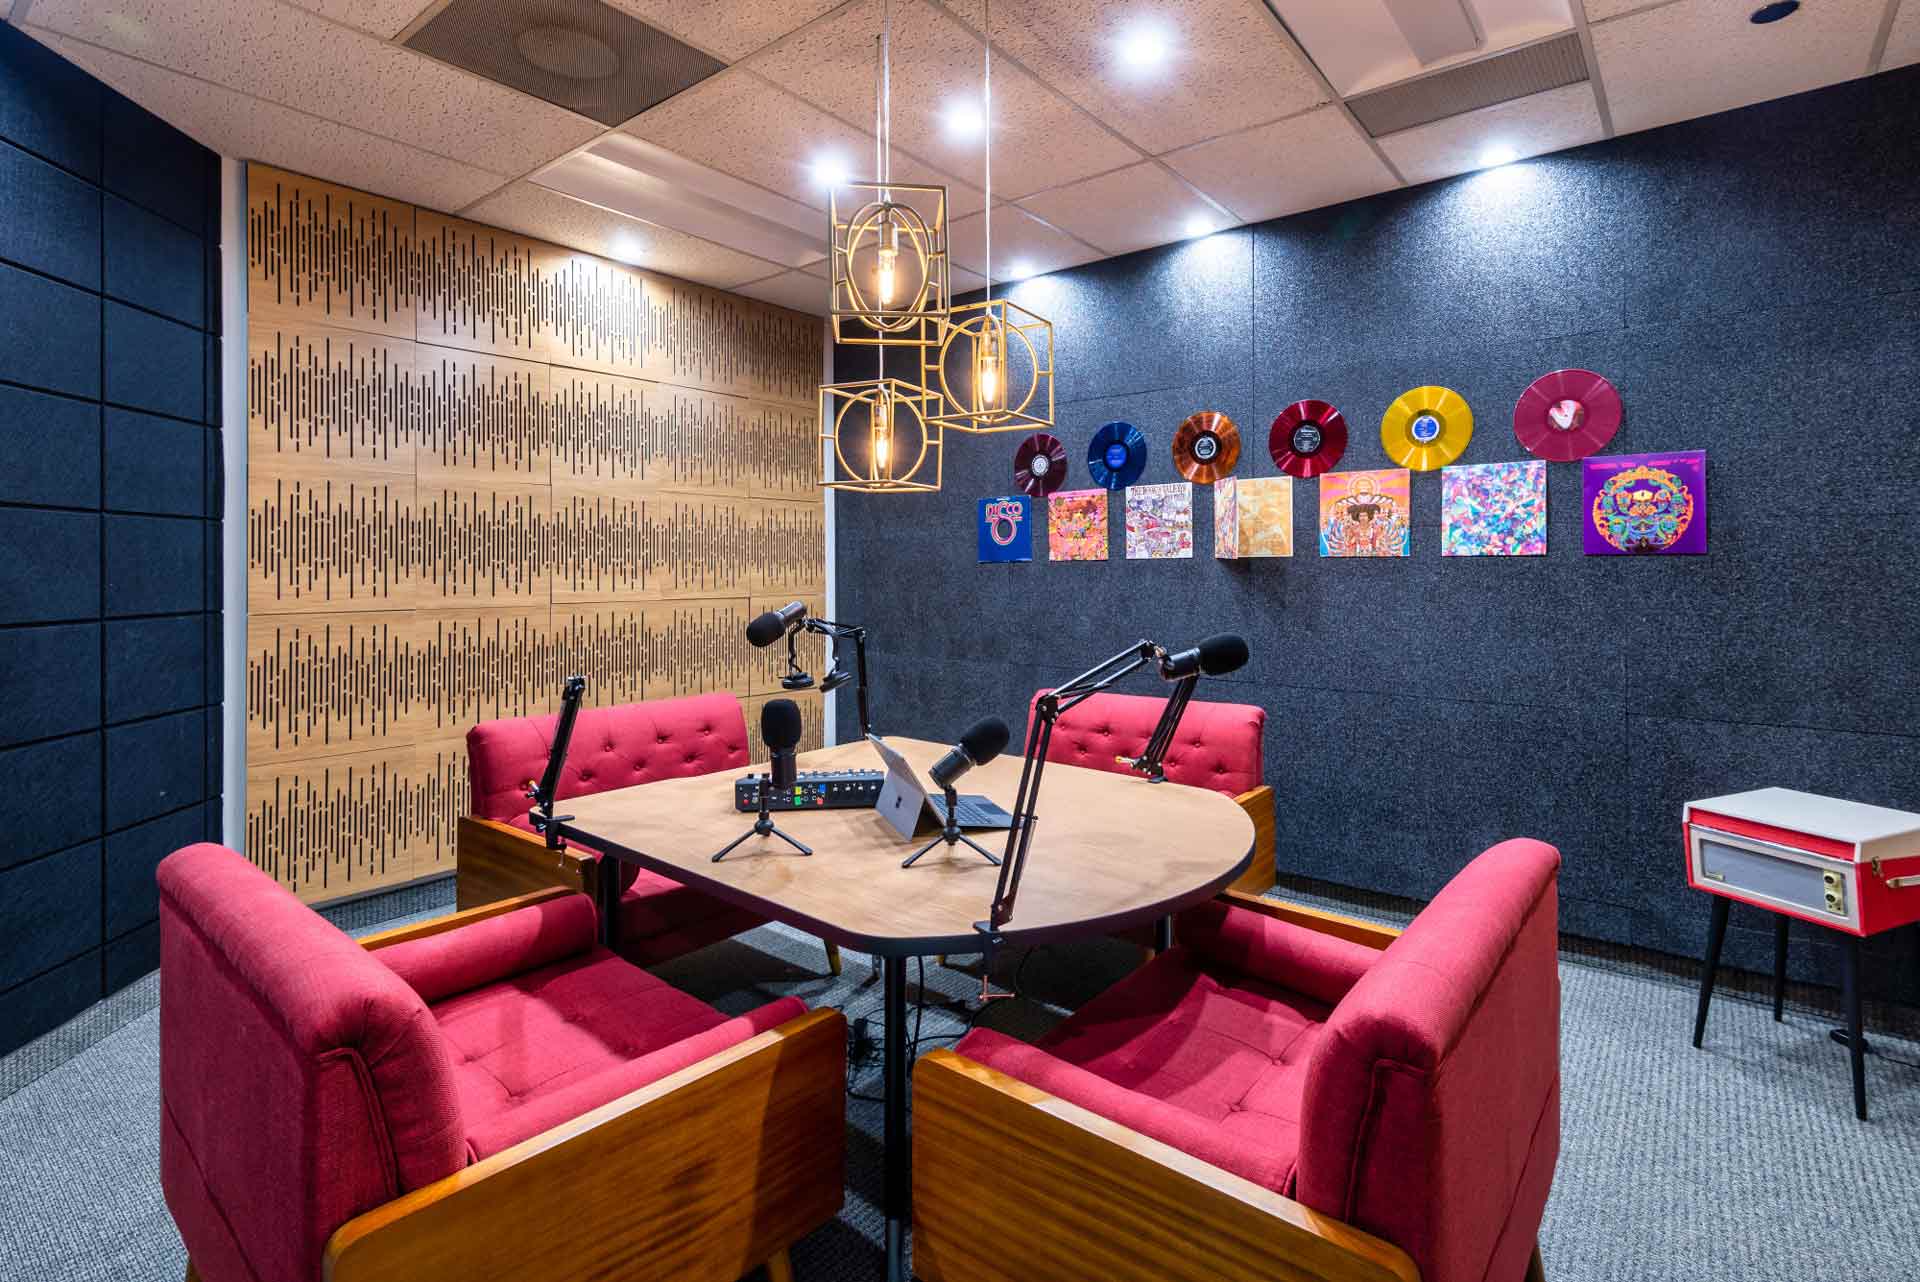 Podcast Room at Uptown Dallas with 4 sofa seats and mics. Soundproofing walls with dics cover decoration